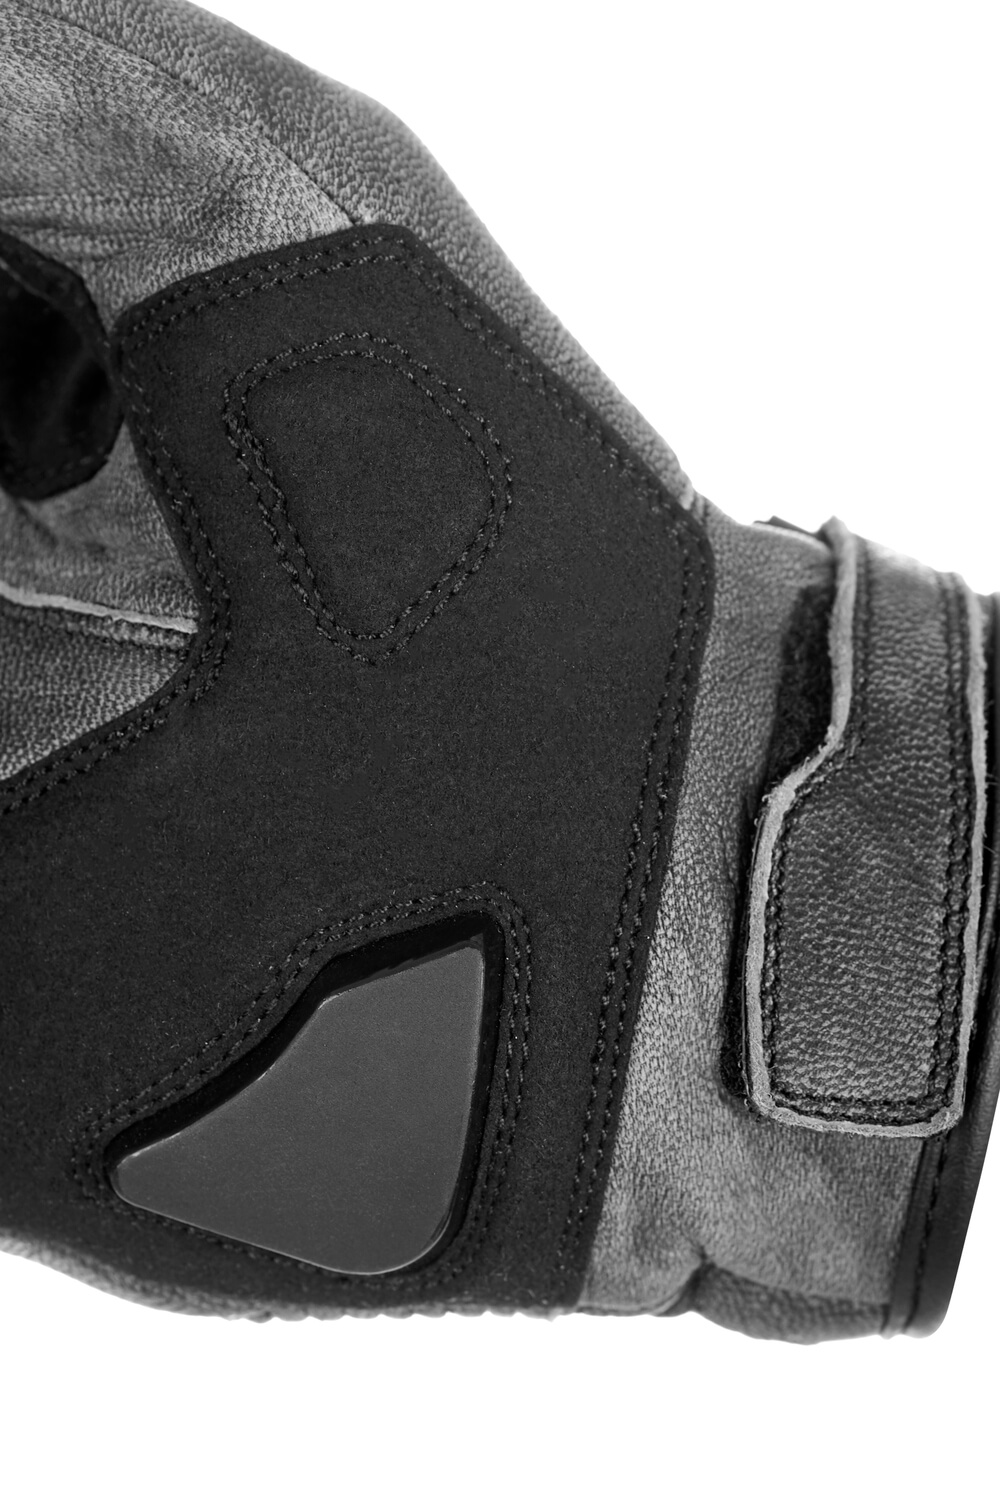 ONYX GREY - Leather Motorcycle Gloves 4